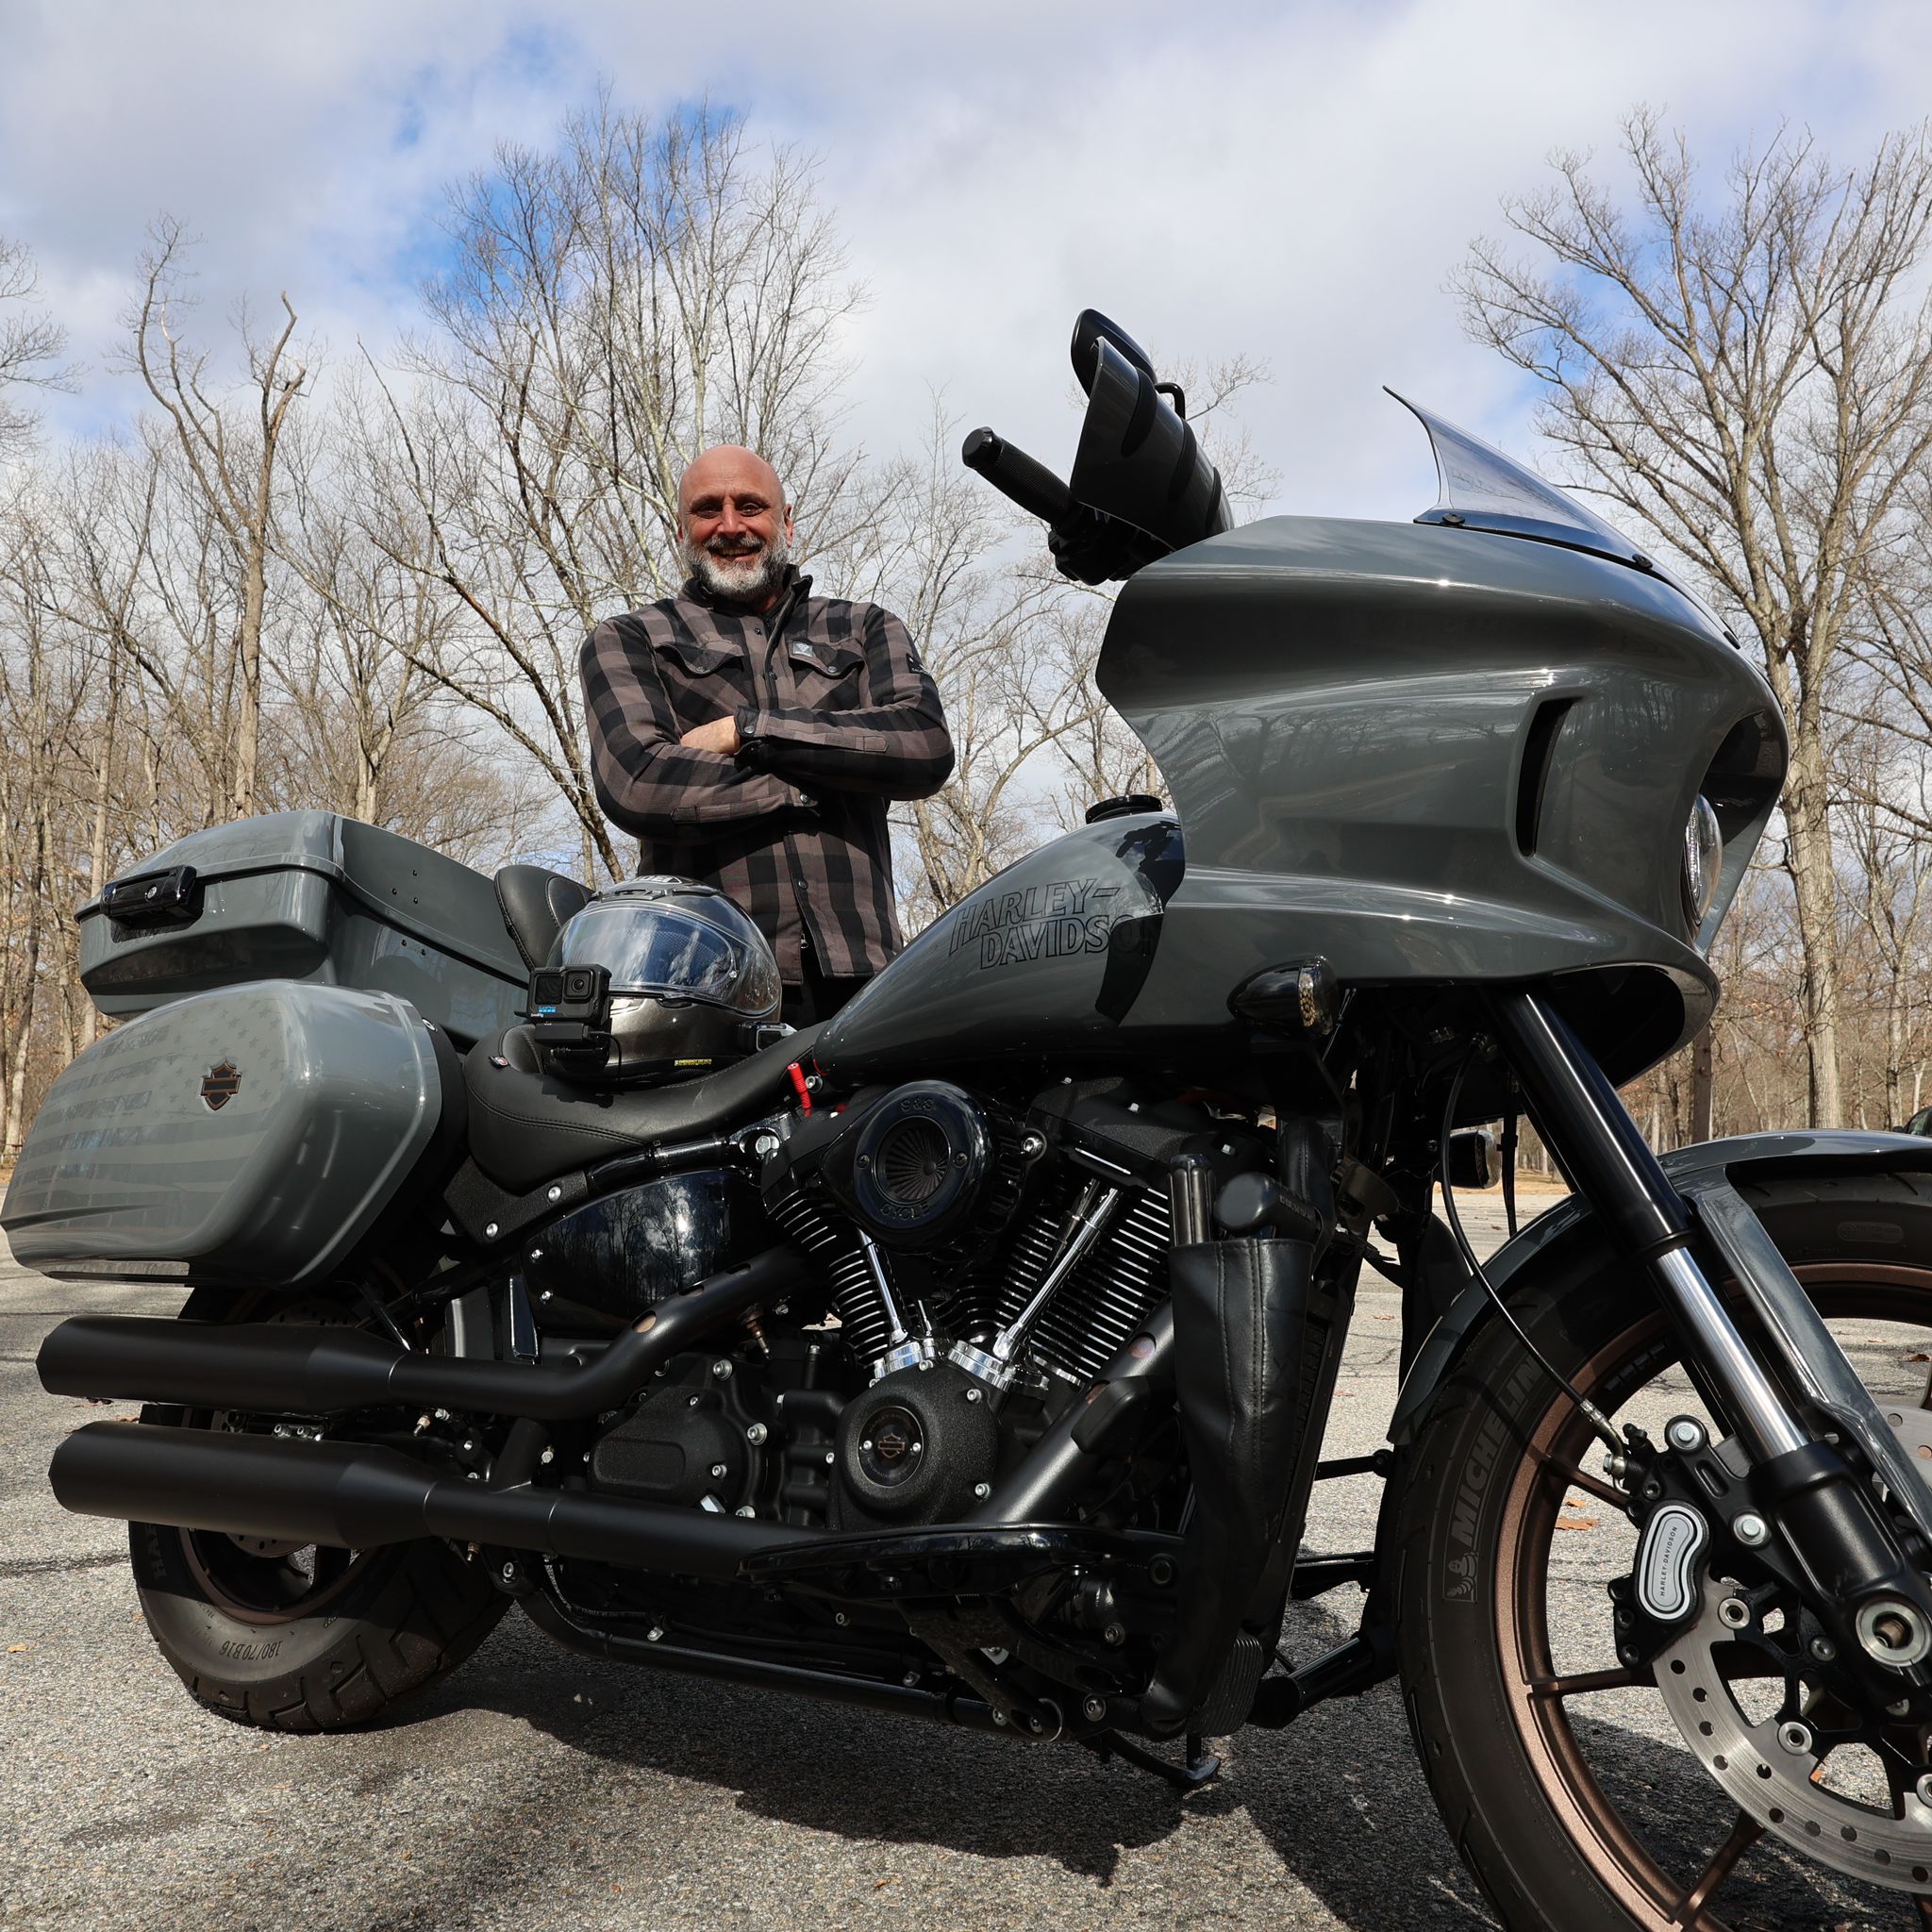 Meet Sandy, a Harley Davidson Youtuber and our Rider of the Month